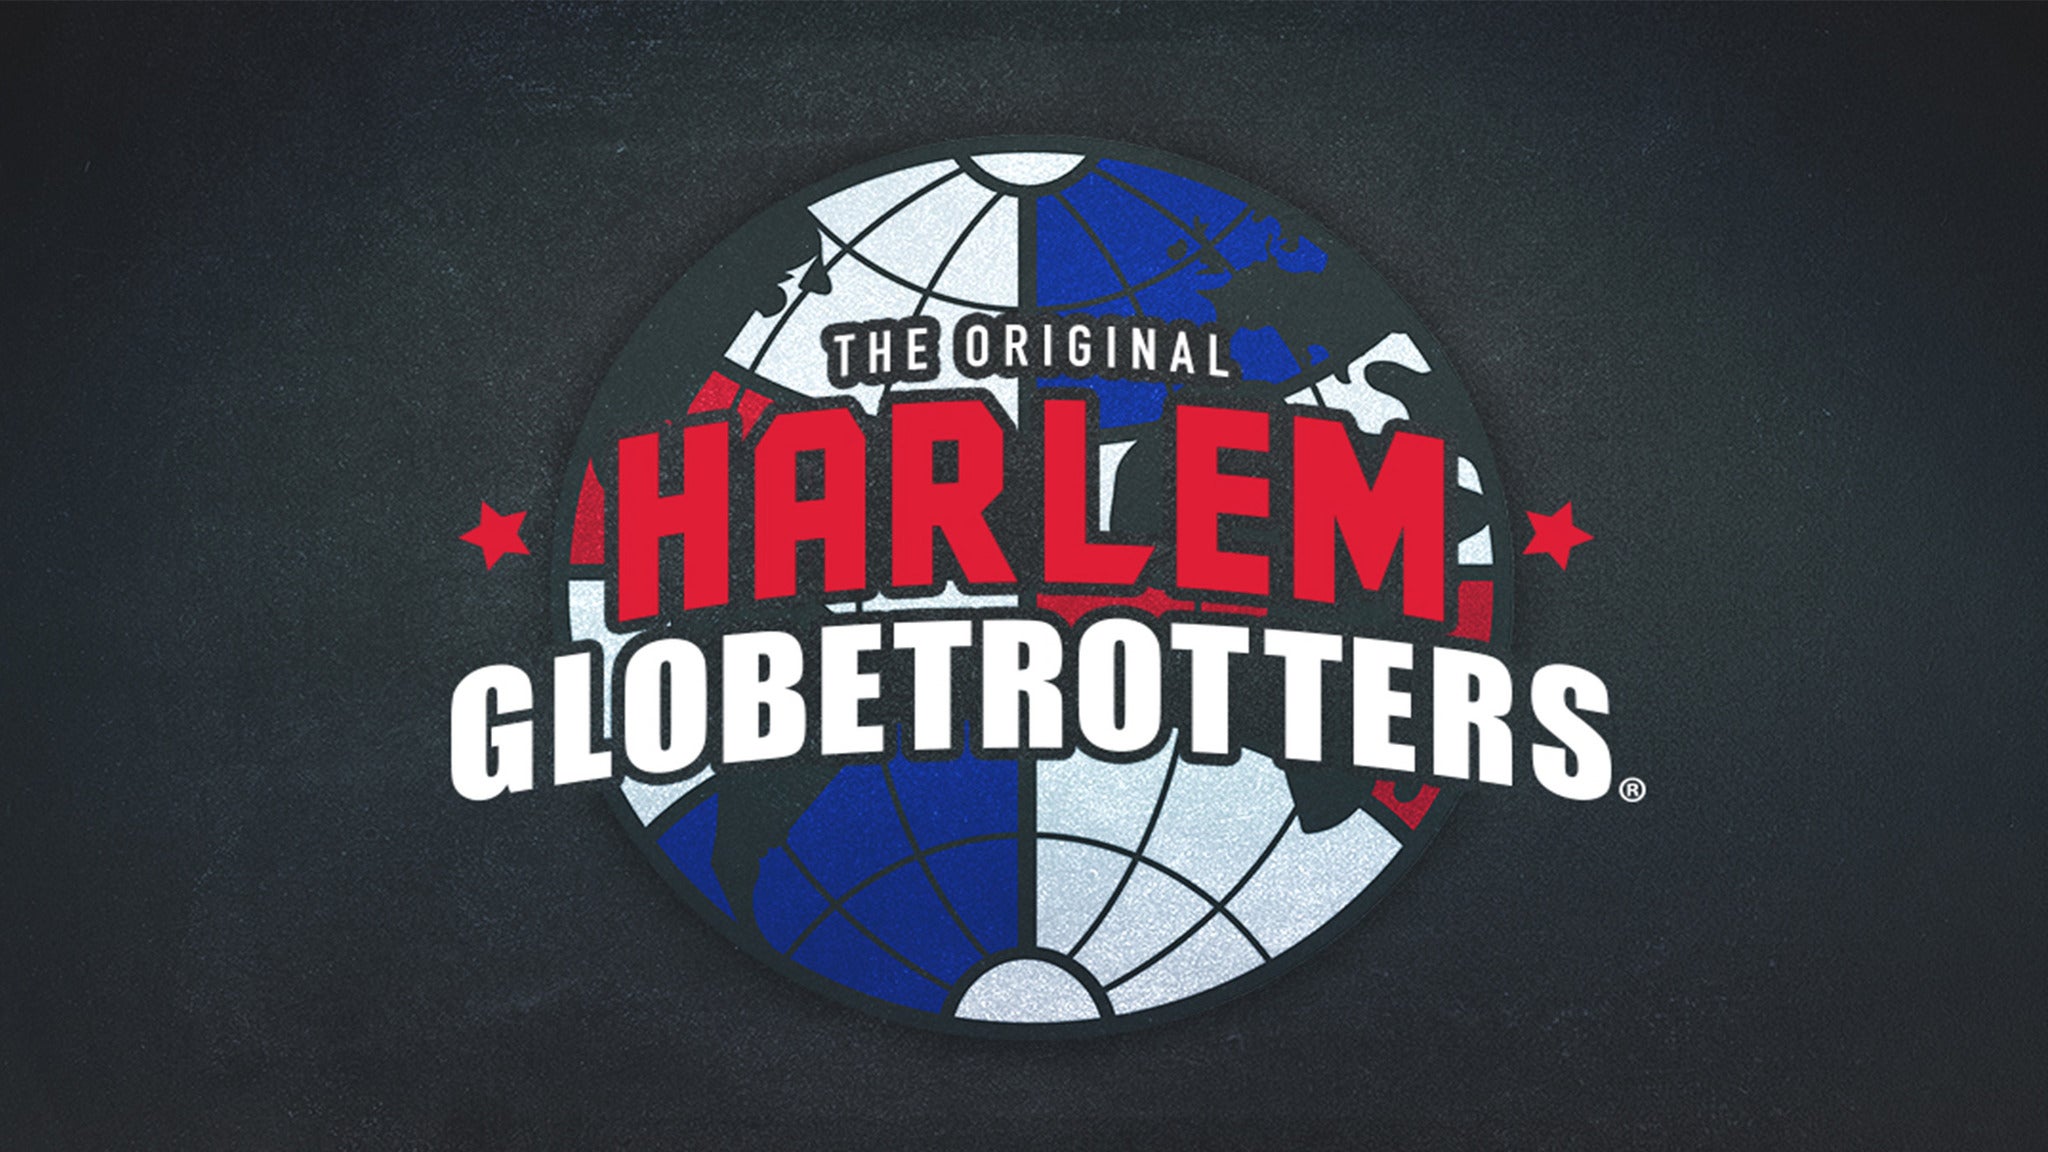 Harlem Globetrotters pre-sale code for early tickets in Evansville